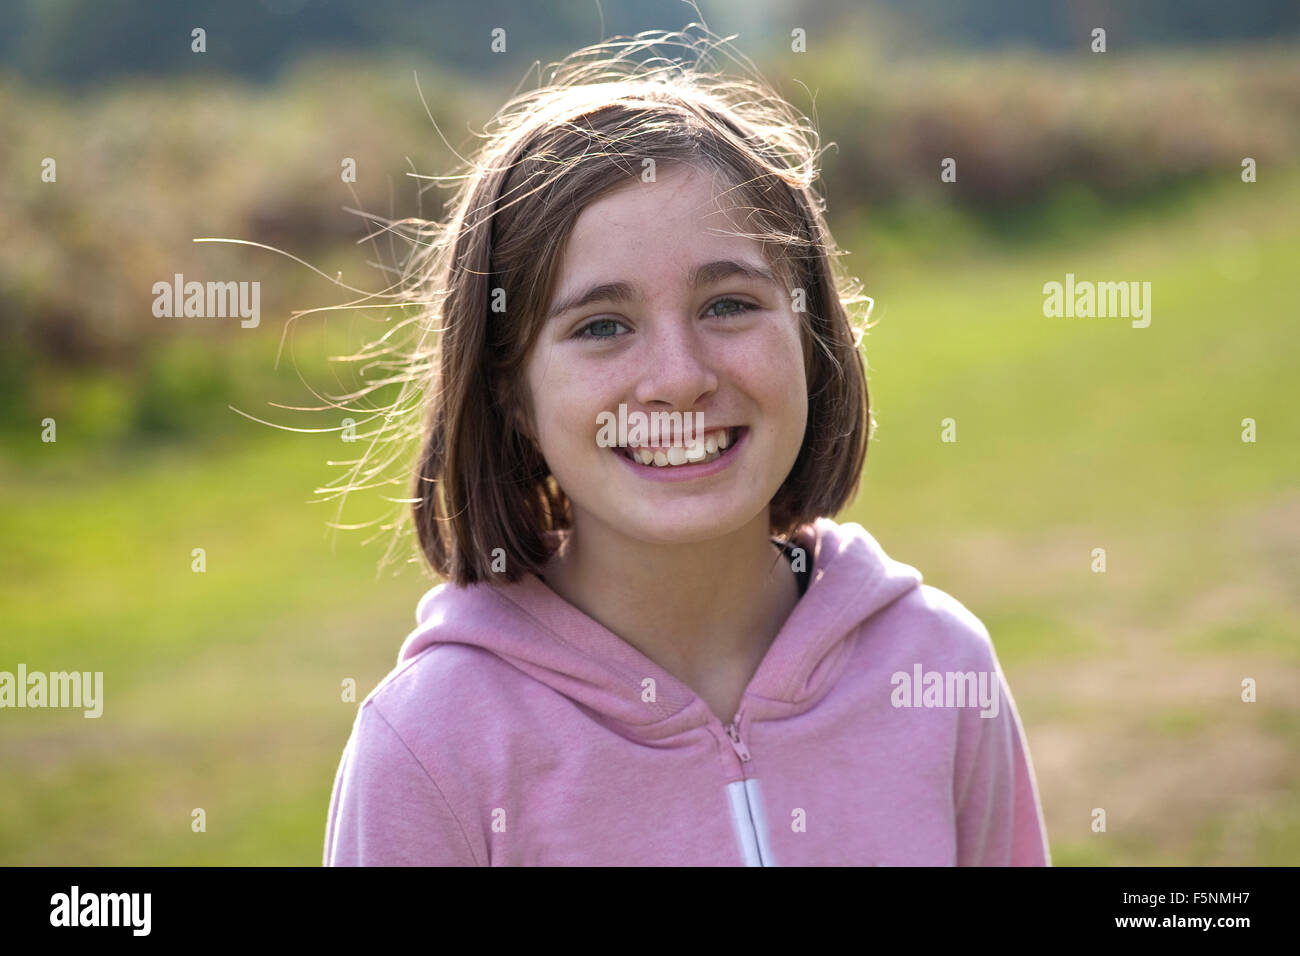 A young girl smiles at the camera. She is back lit and she is standing in the middle of a park. The sunlight is autumnal. Stock Photo